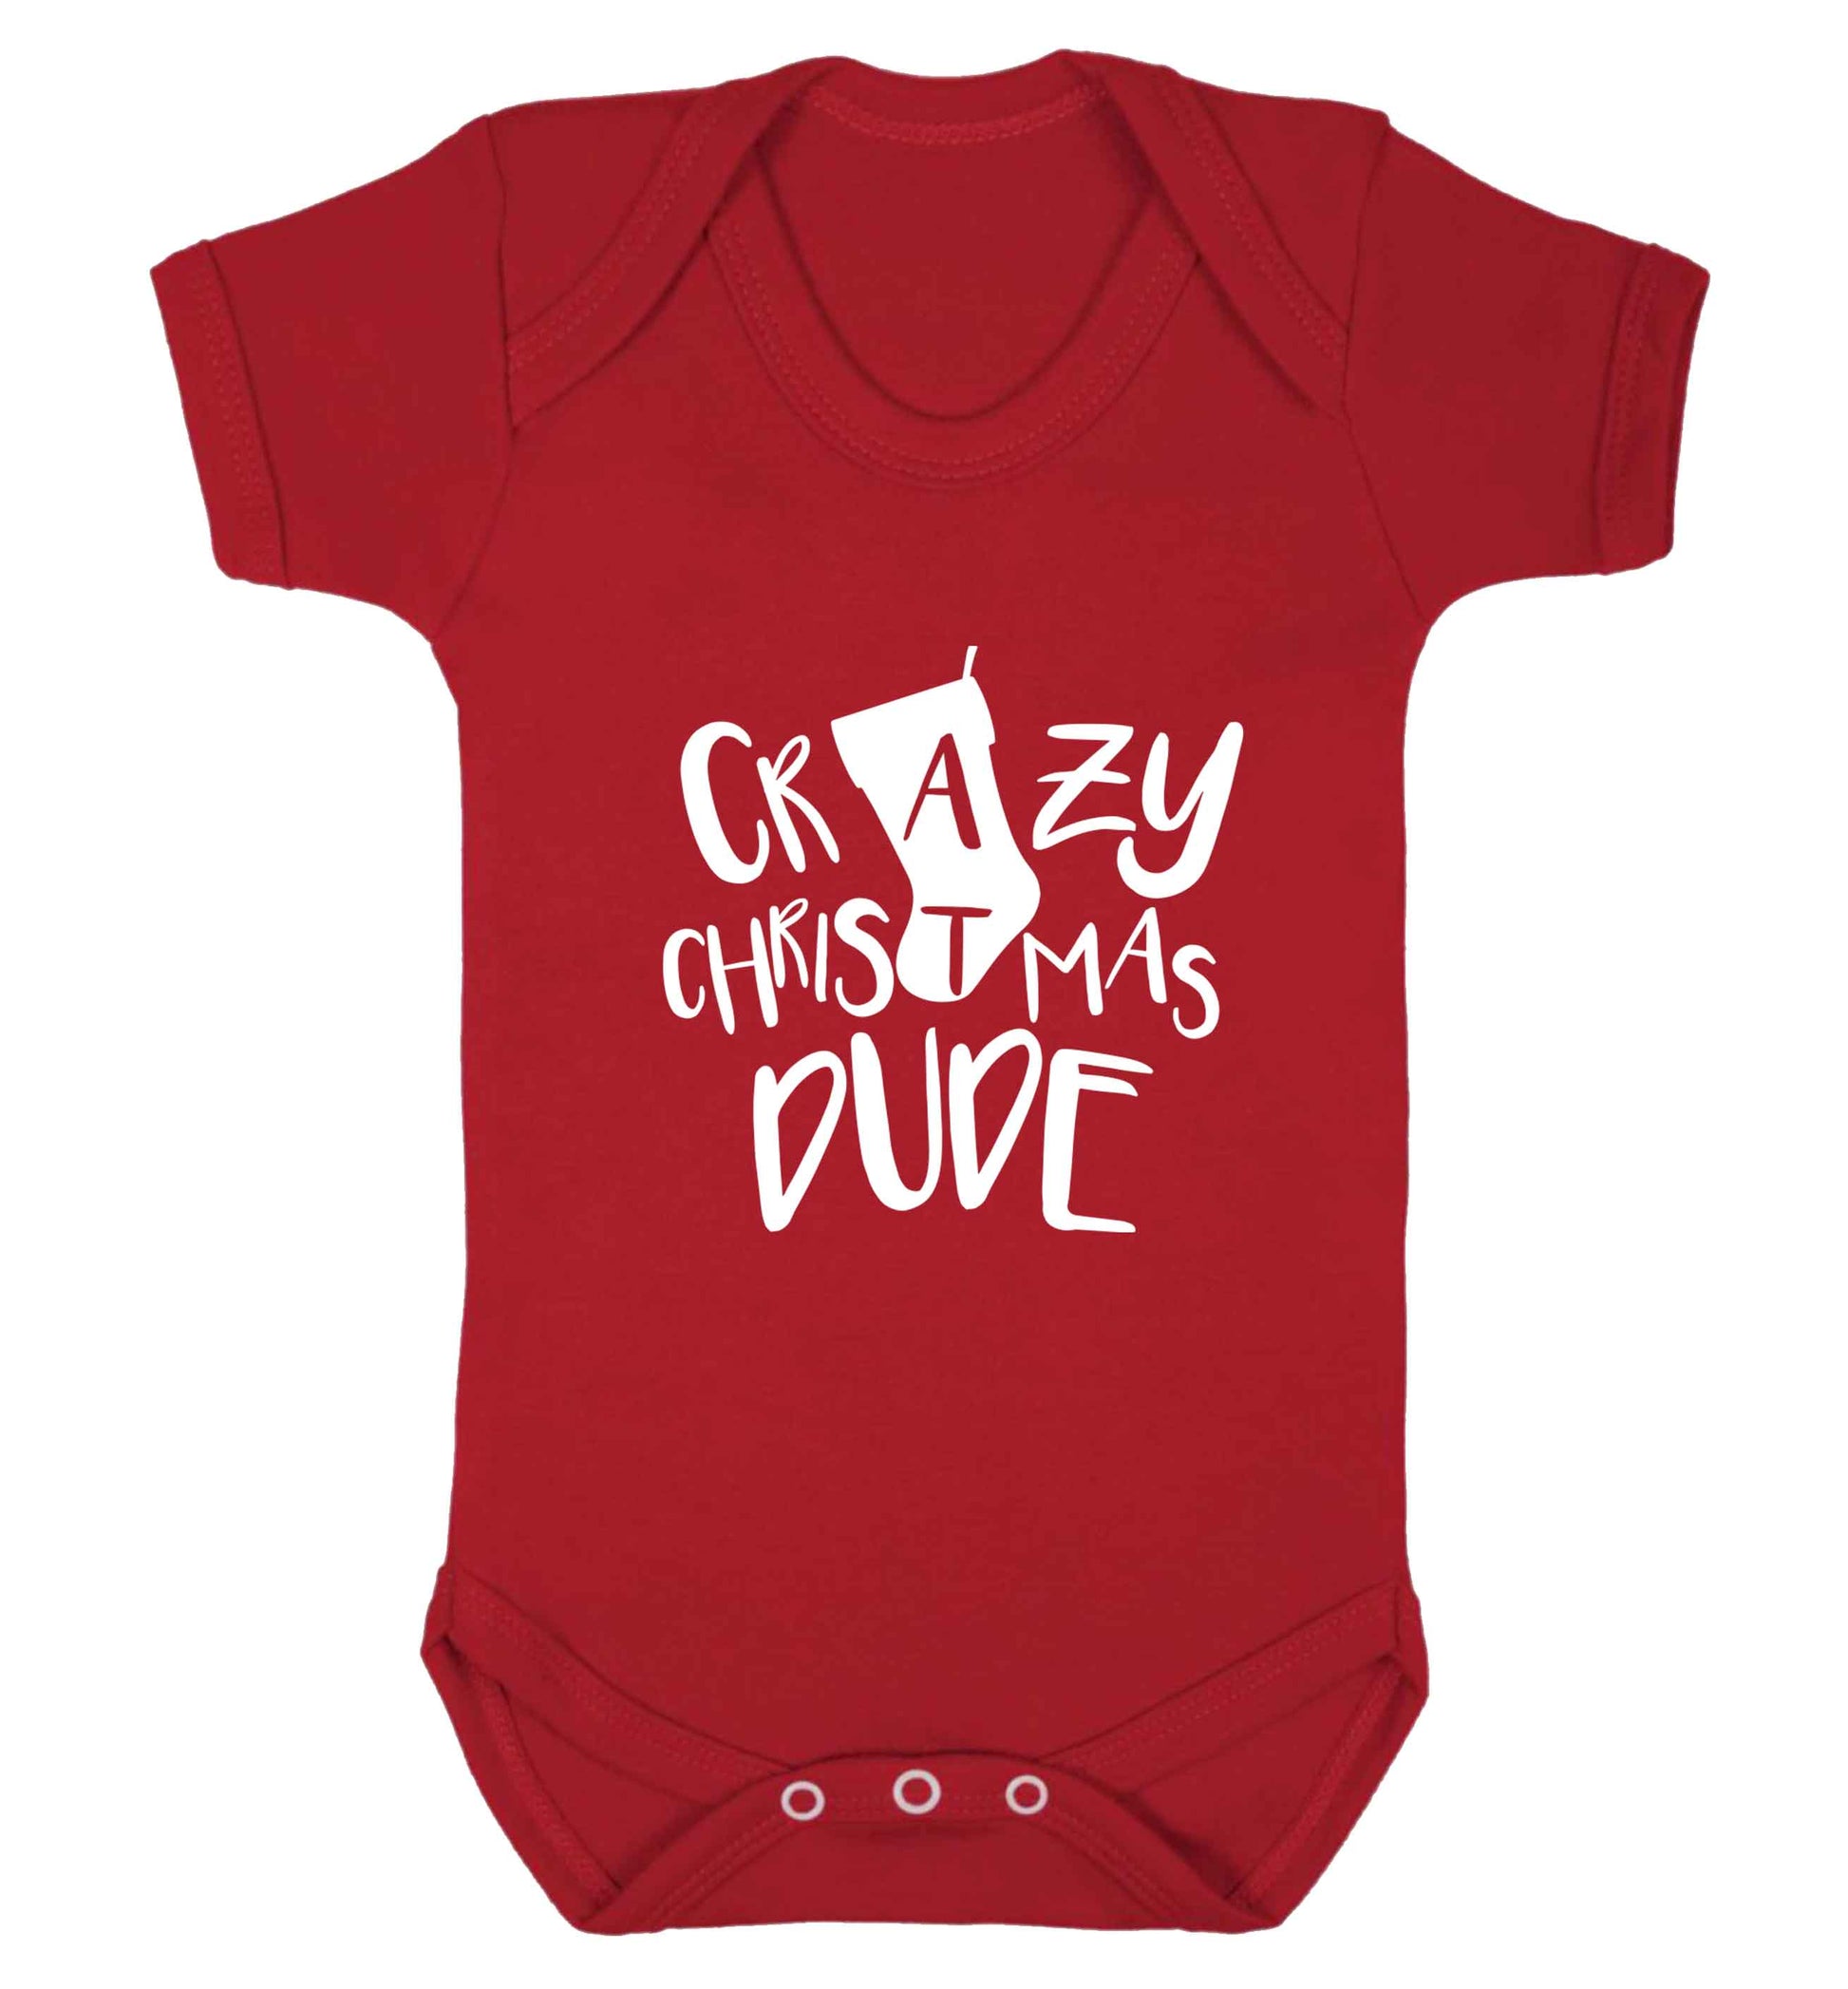 Crazy Christmas Dude baby vest red 18-24 months